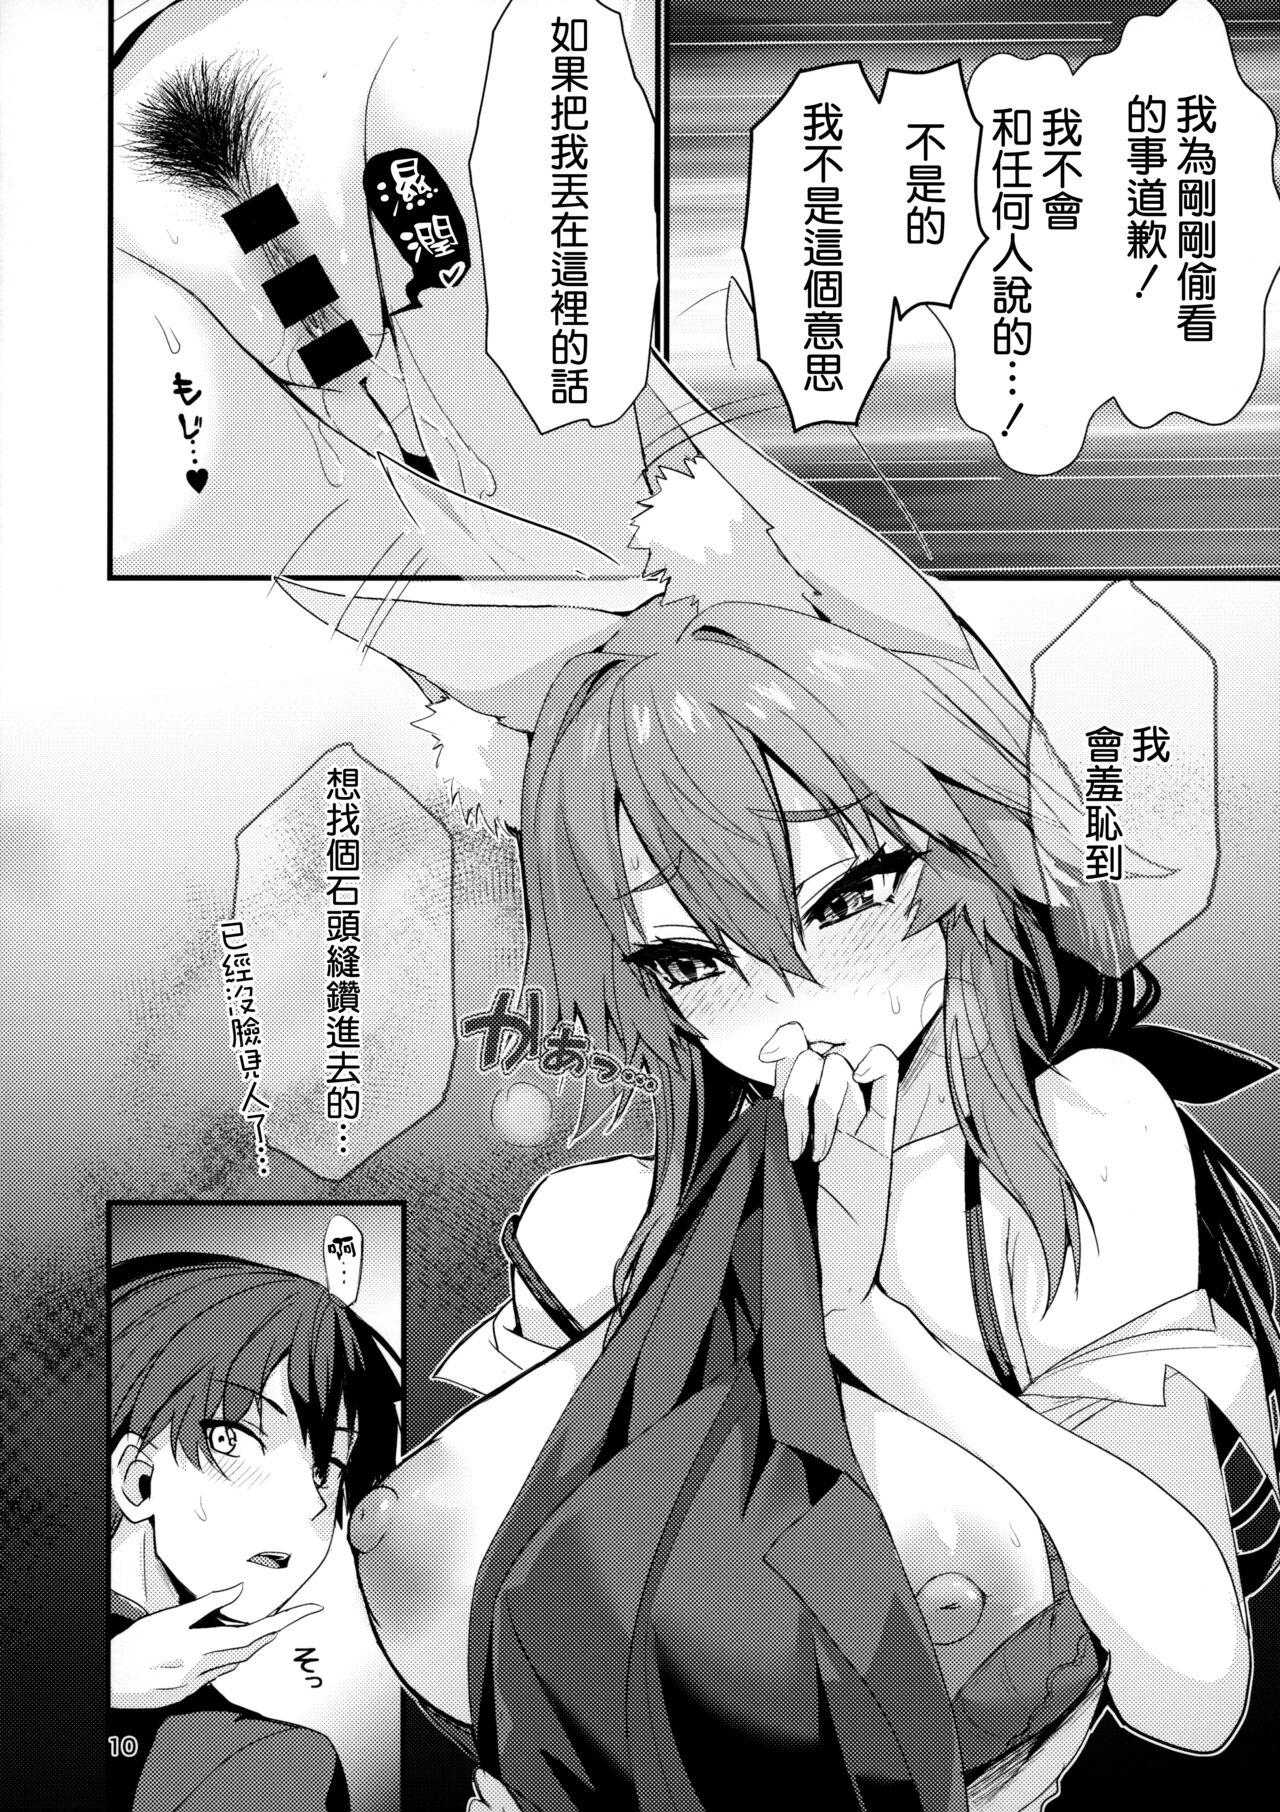 Blowjobs 先輩OLタマモさん - Fate extra Mature Woman - Page 10